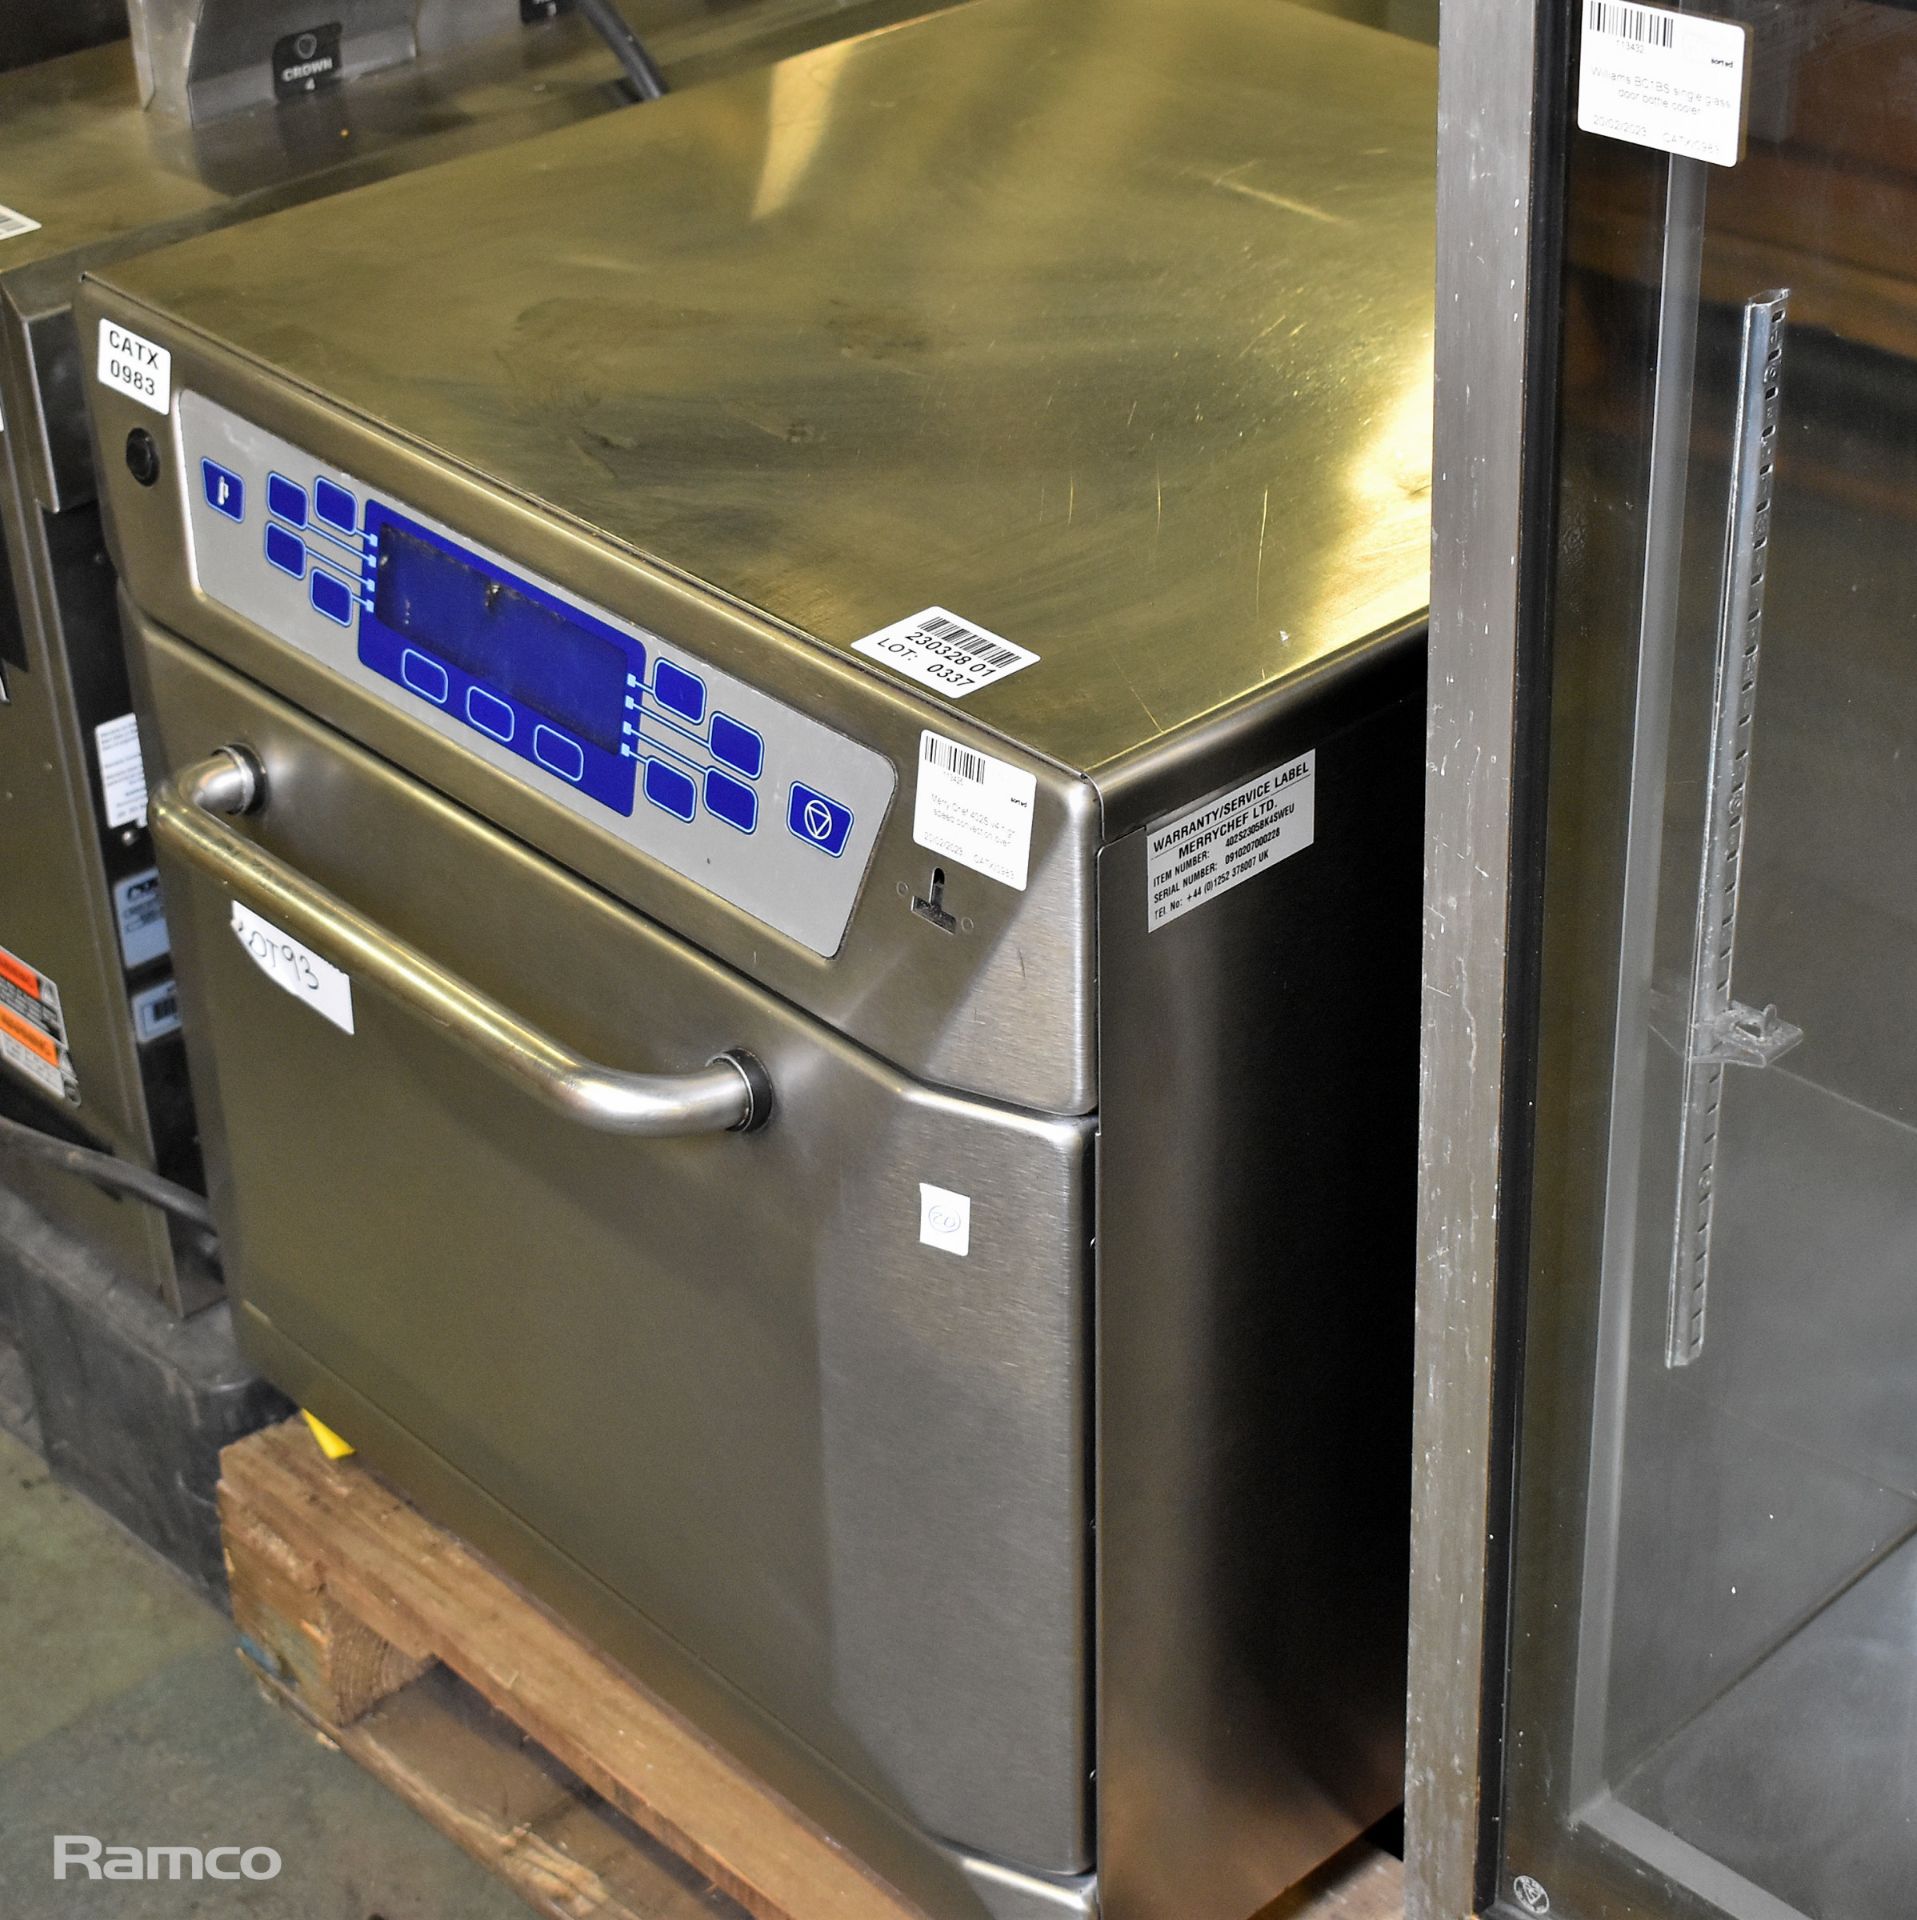 Merrychef 402S v4 high speed convection oven - L585mm - Image 4 of 4